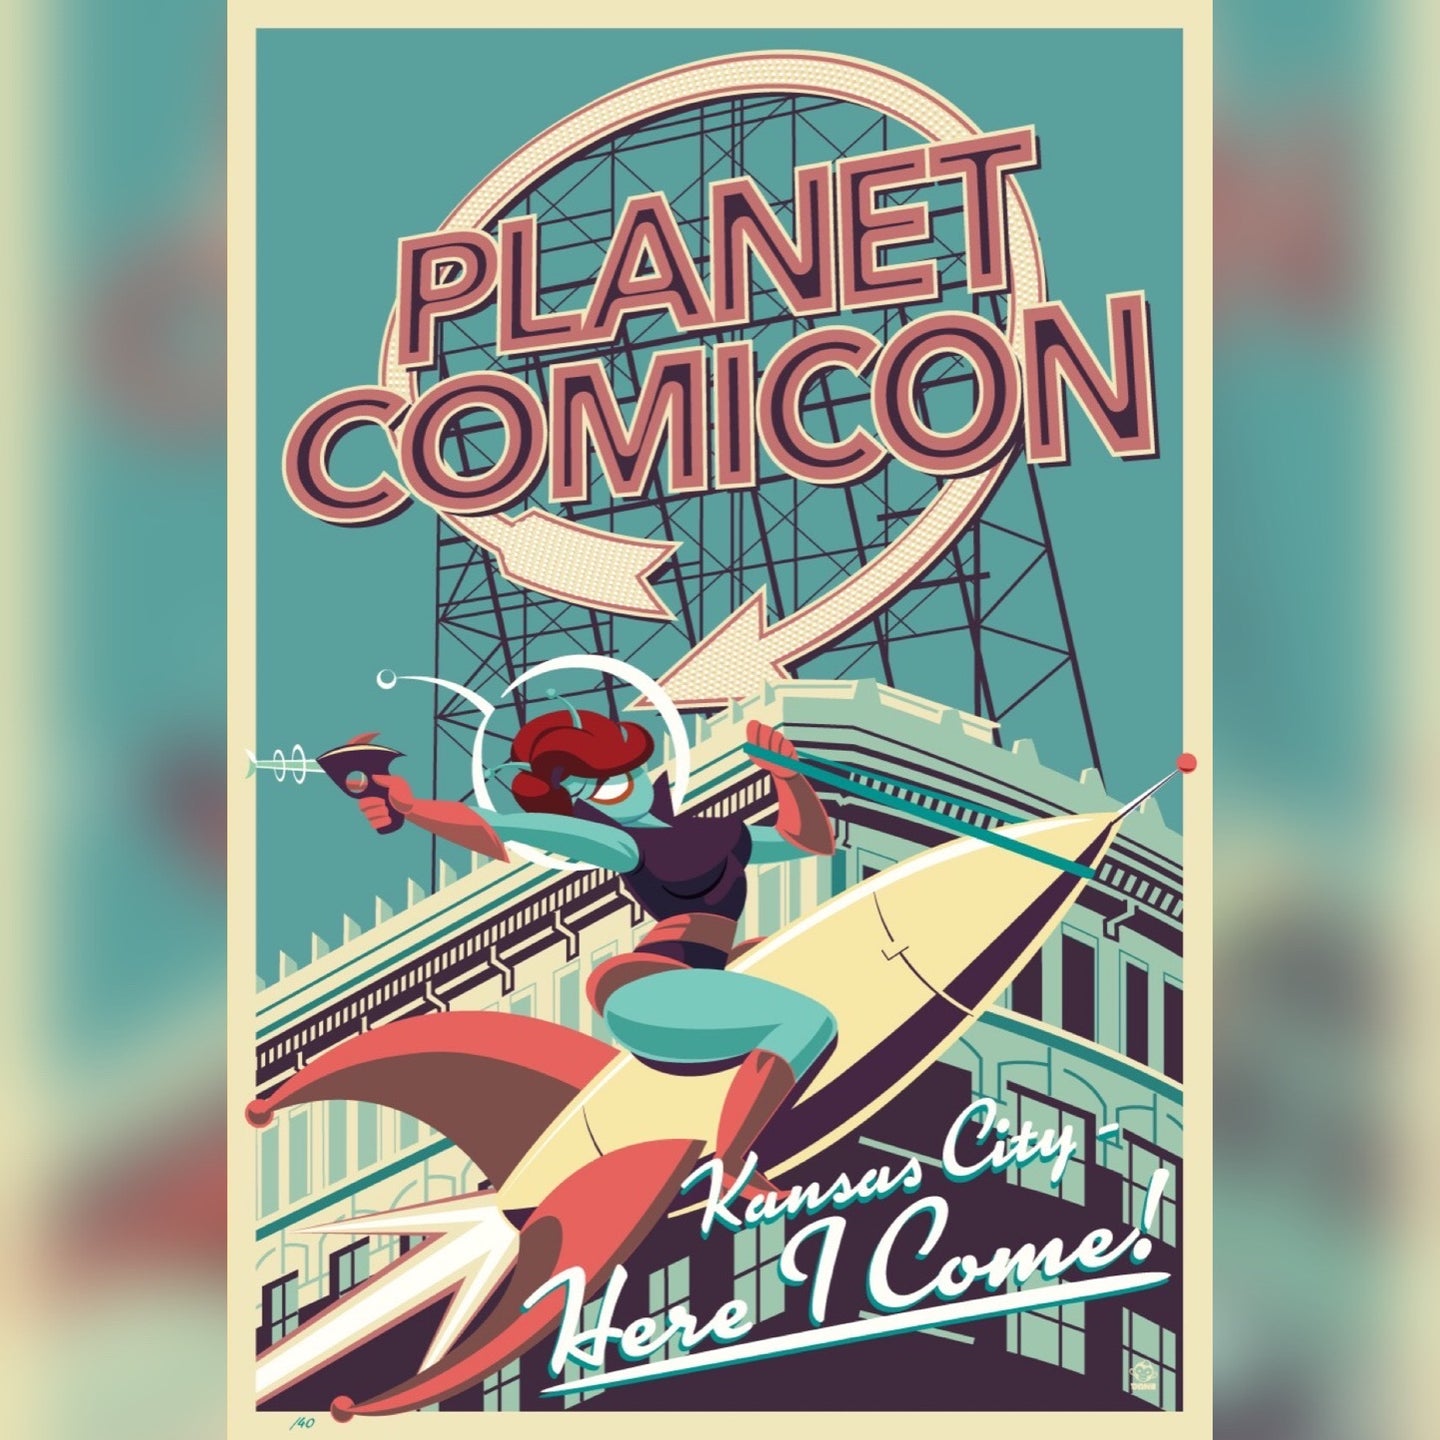 Planet Comicon 13x19 Limited Edition Giclee